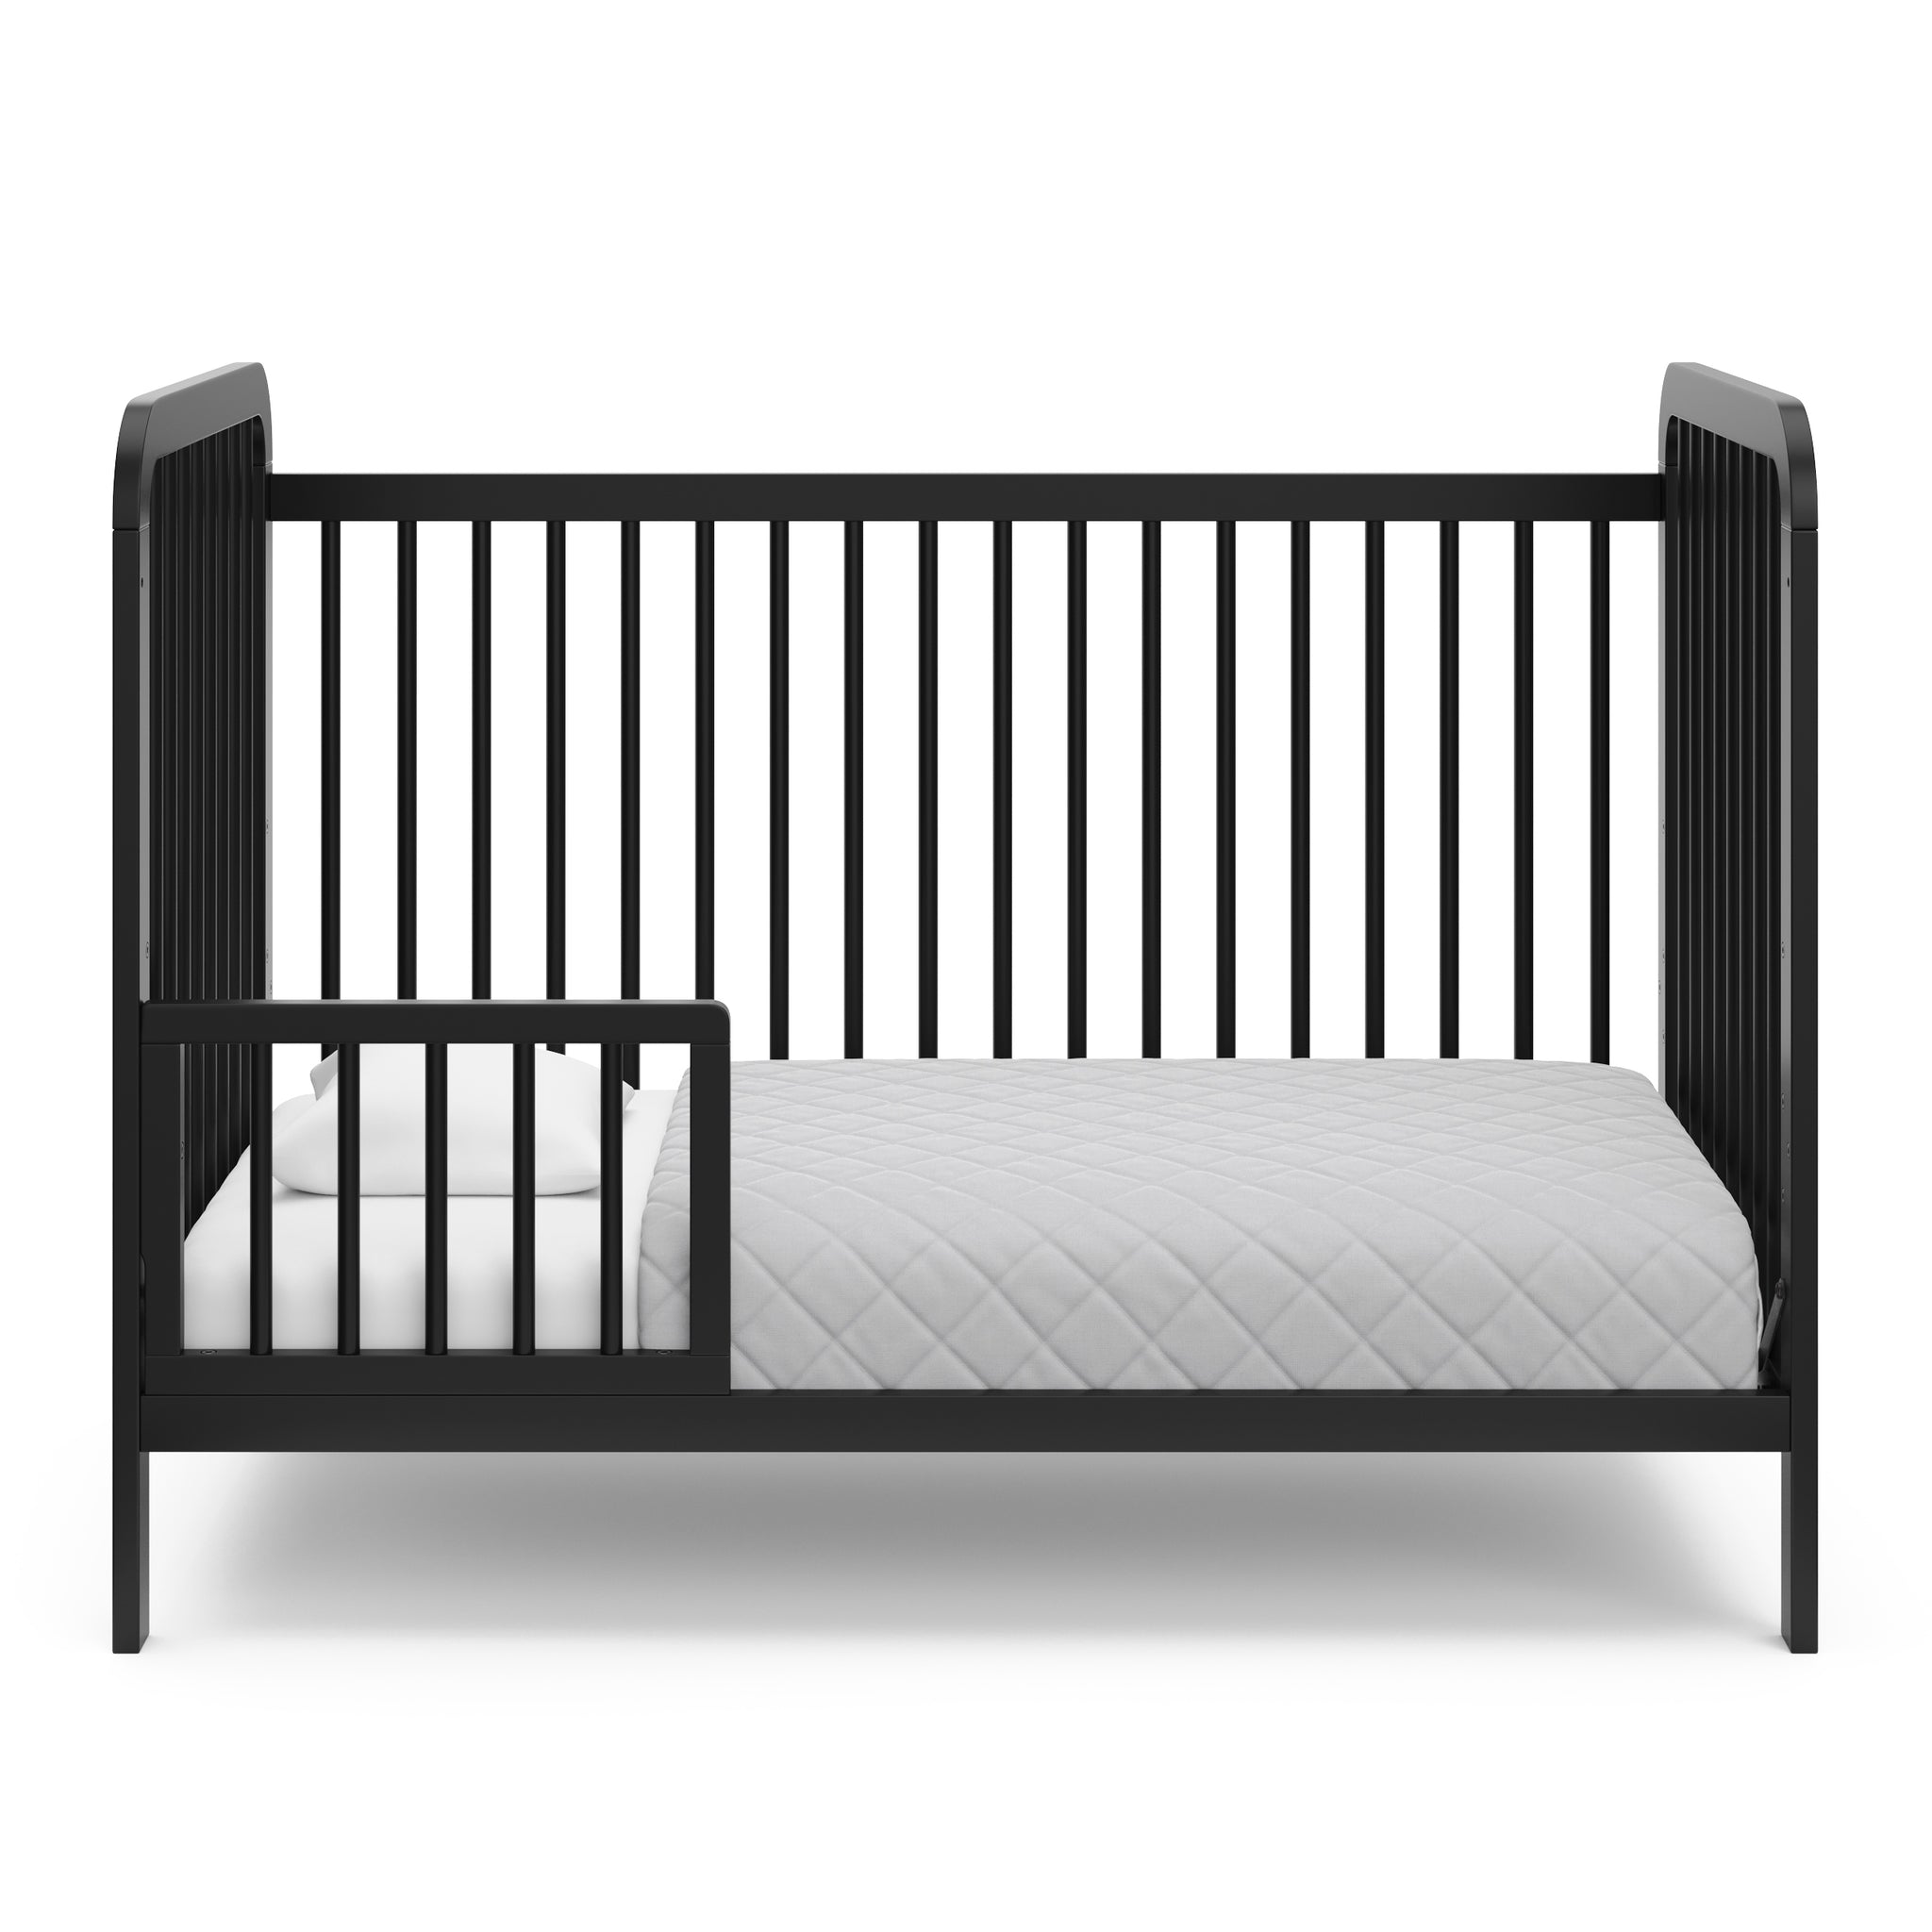 Black crib in toddler bed conversion with one safety guardrail 